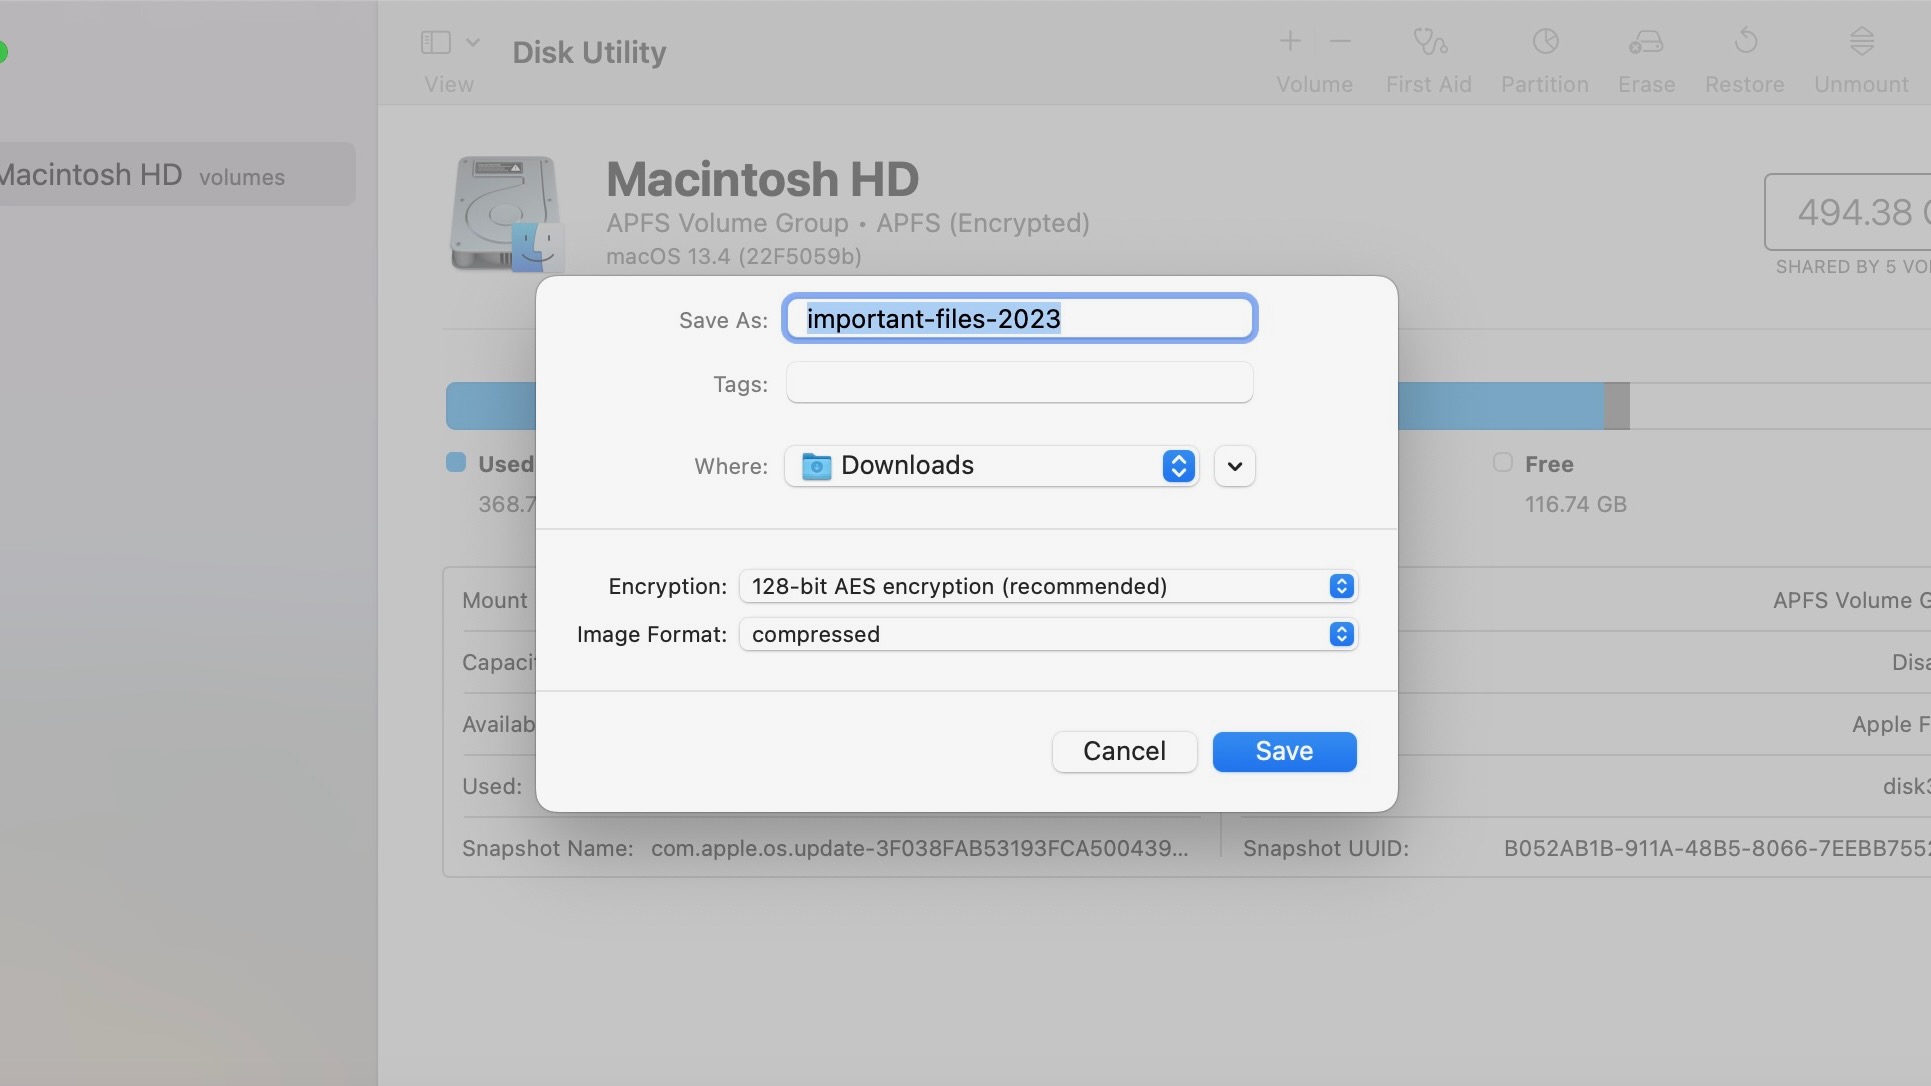 Disk Utility creating an image